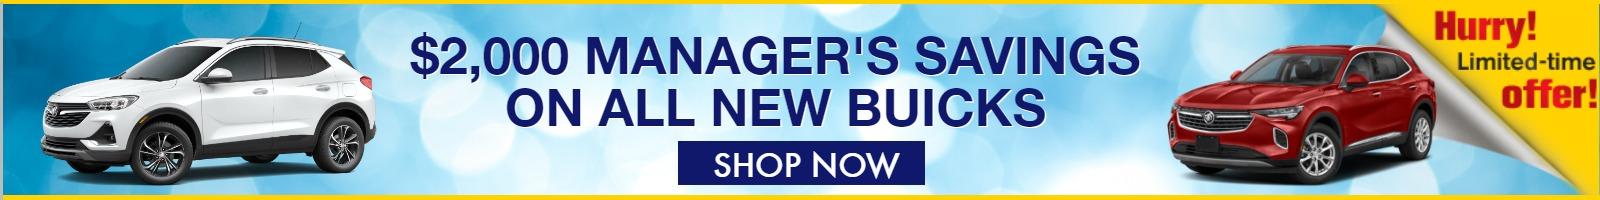 "$2,000 Manager's Special on all new Buicks